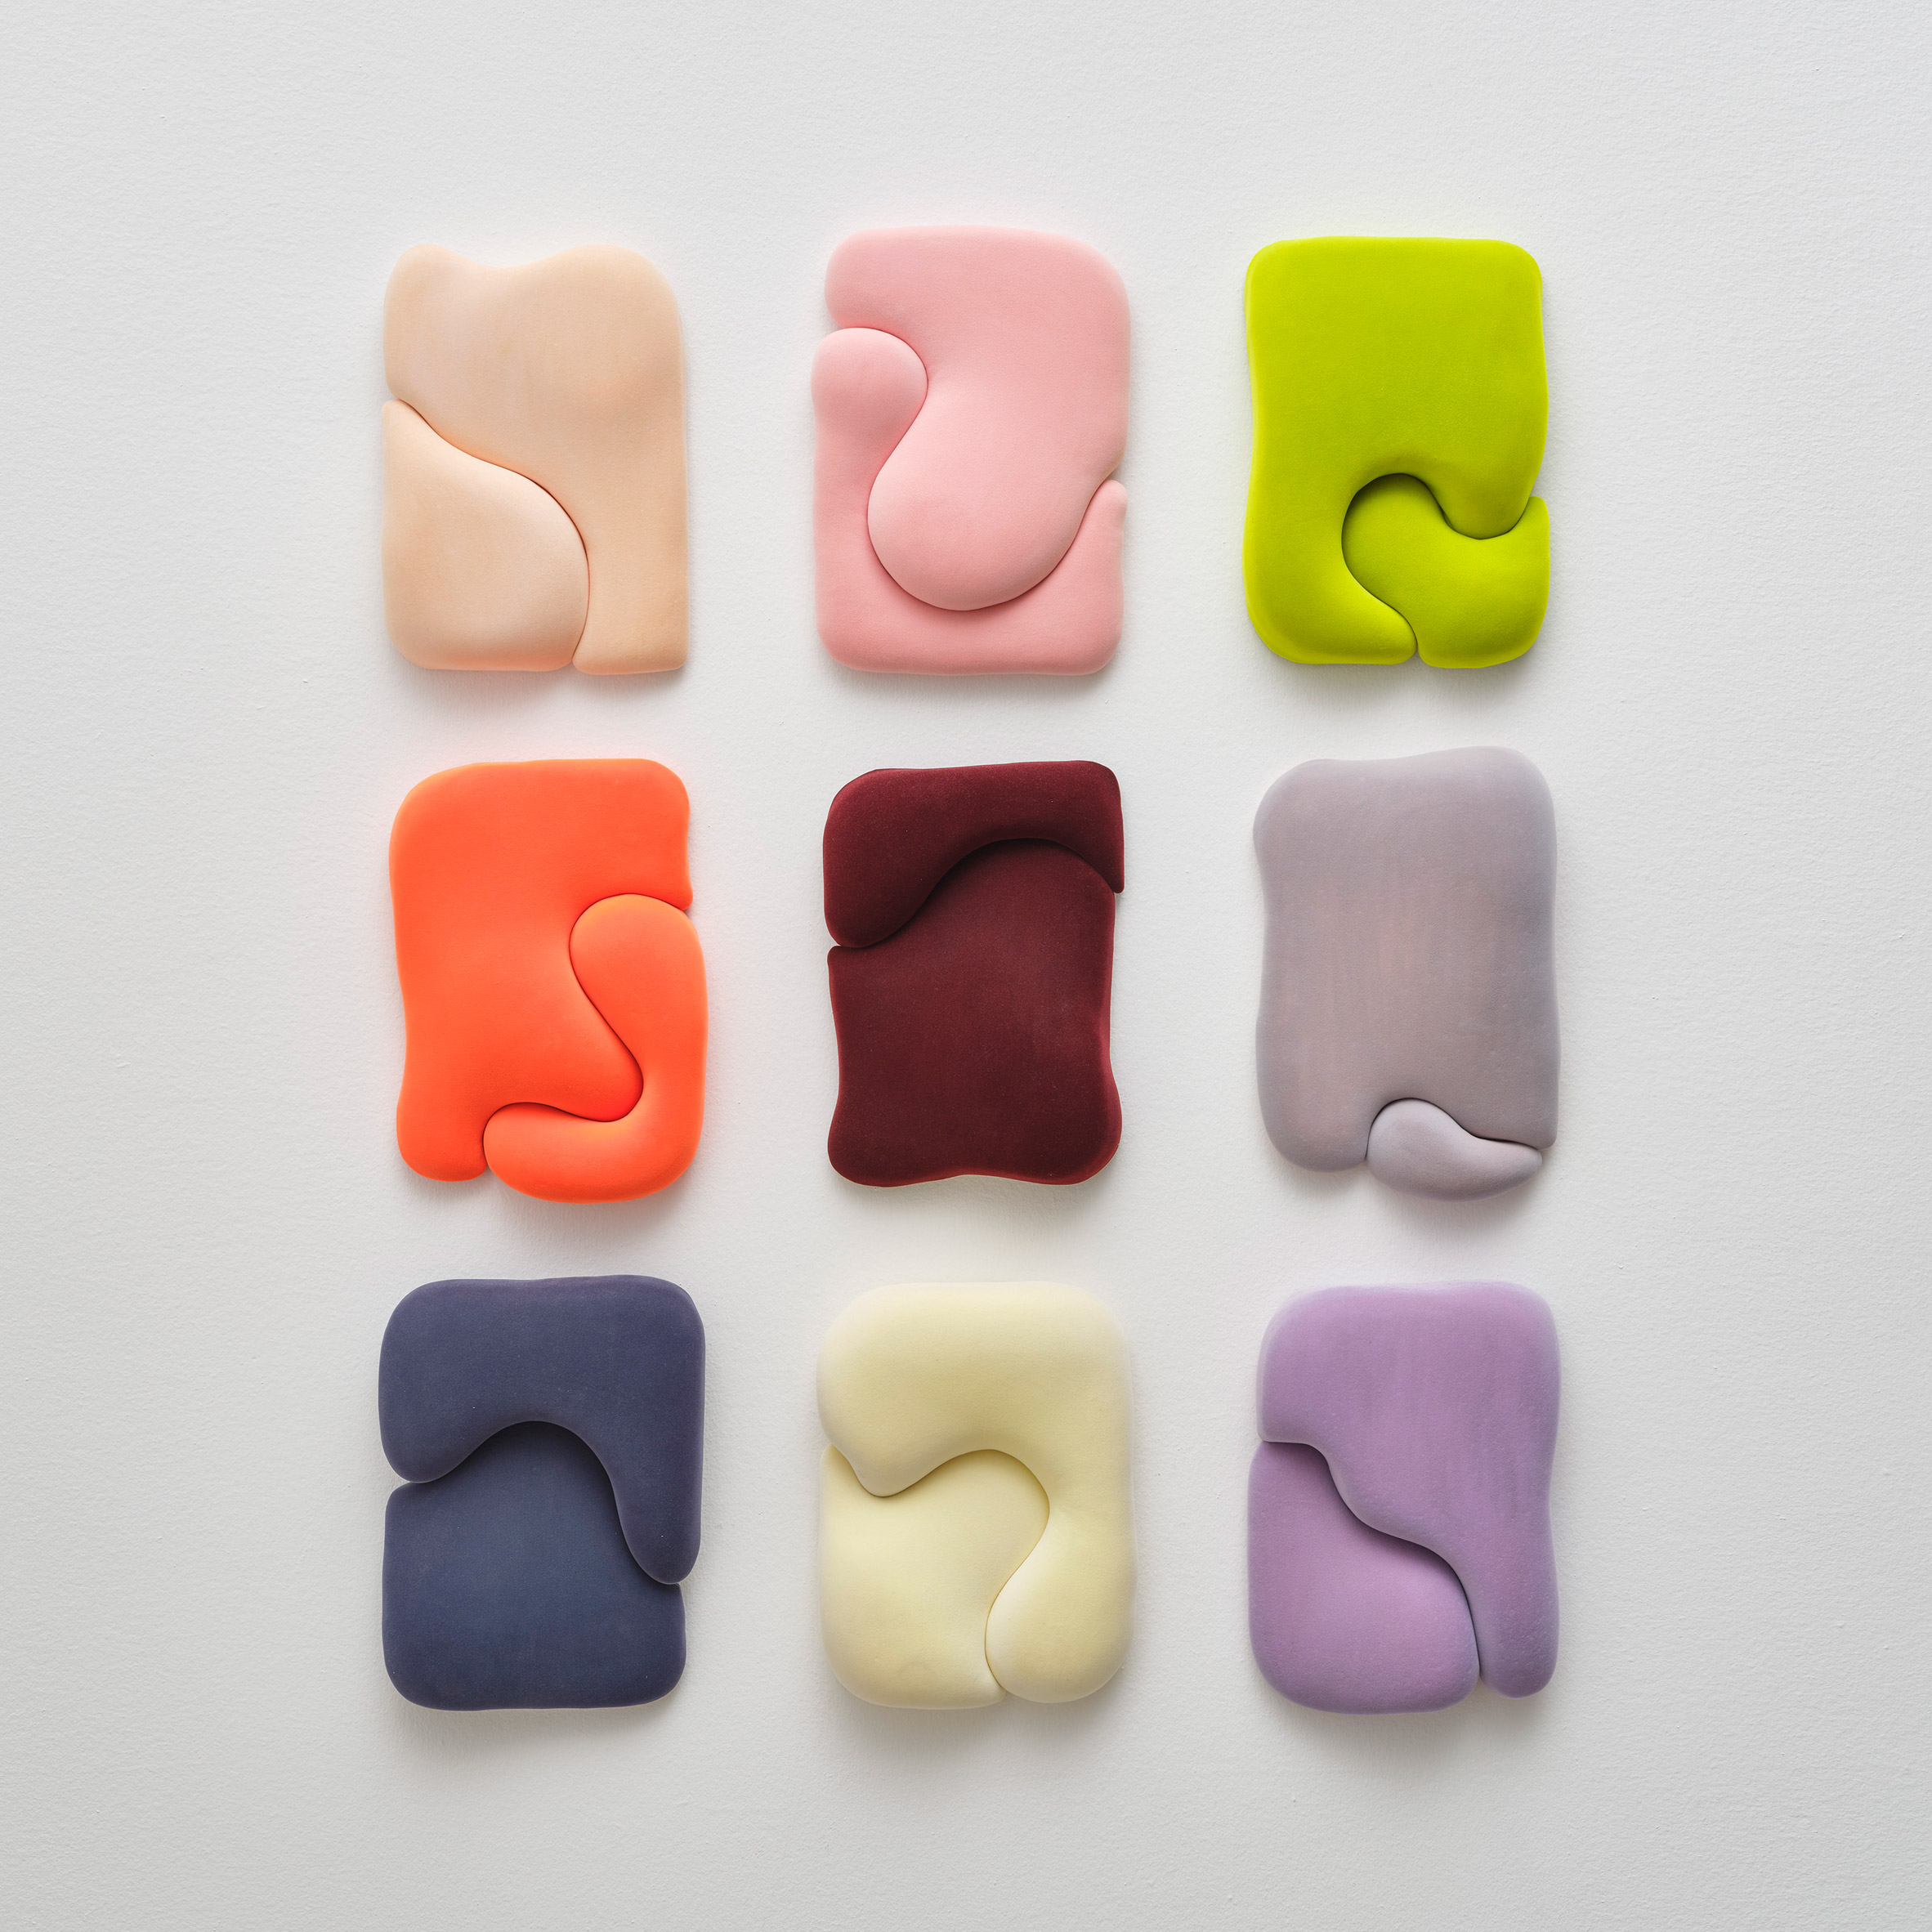 Photograph of the nine Blob series of sculptures mounted on a wall